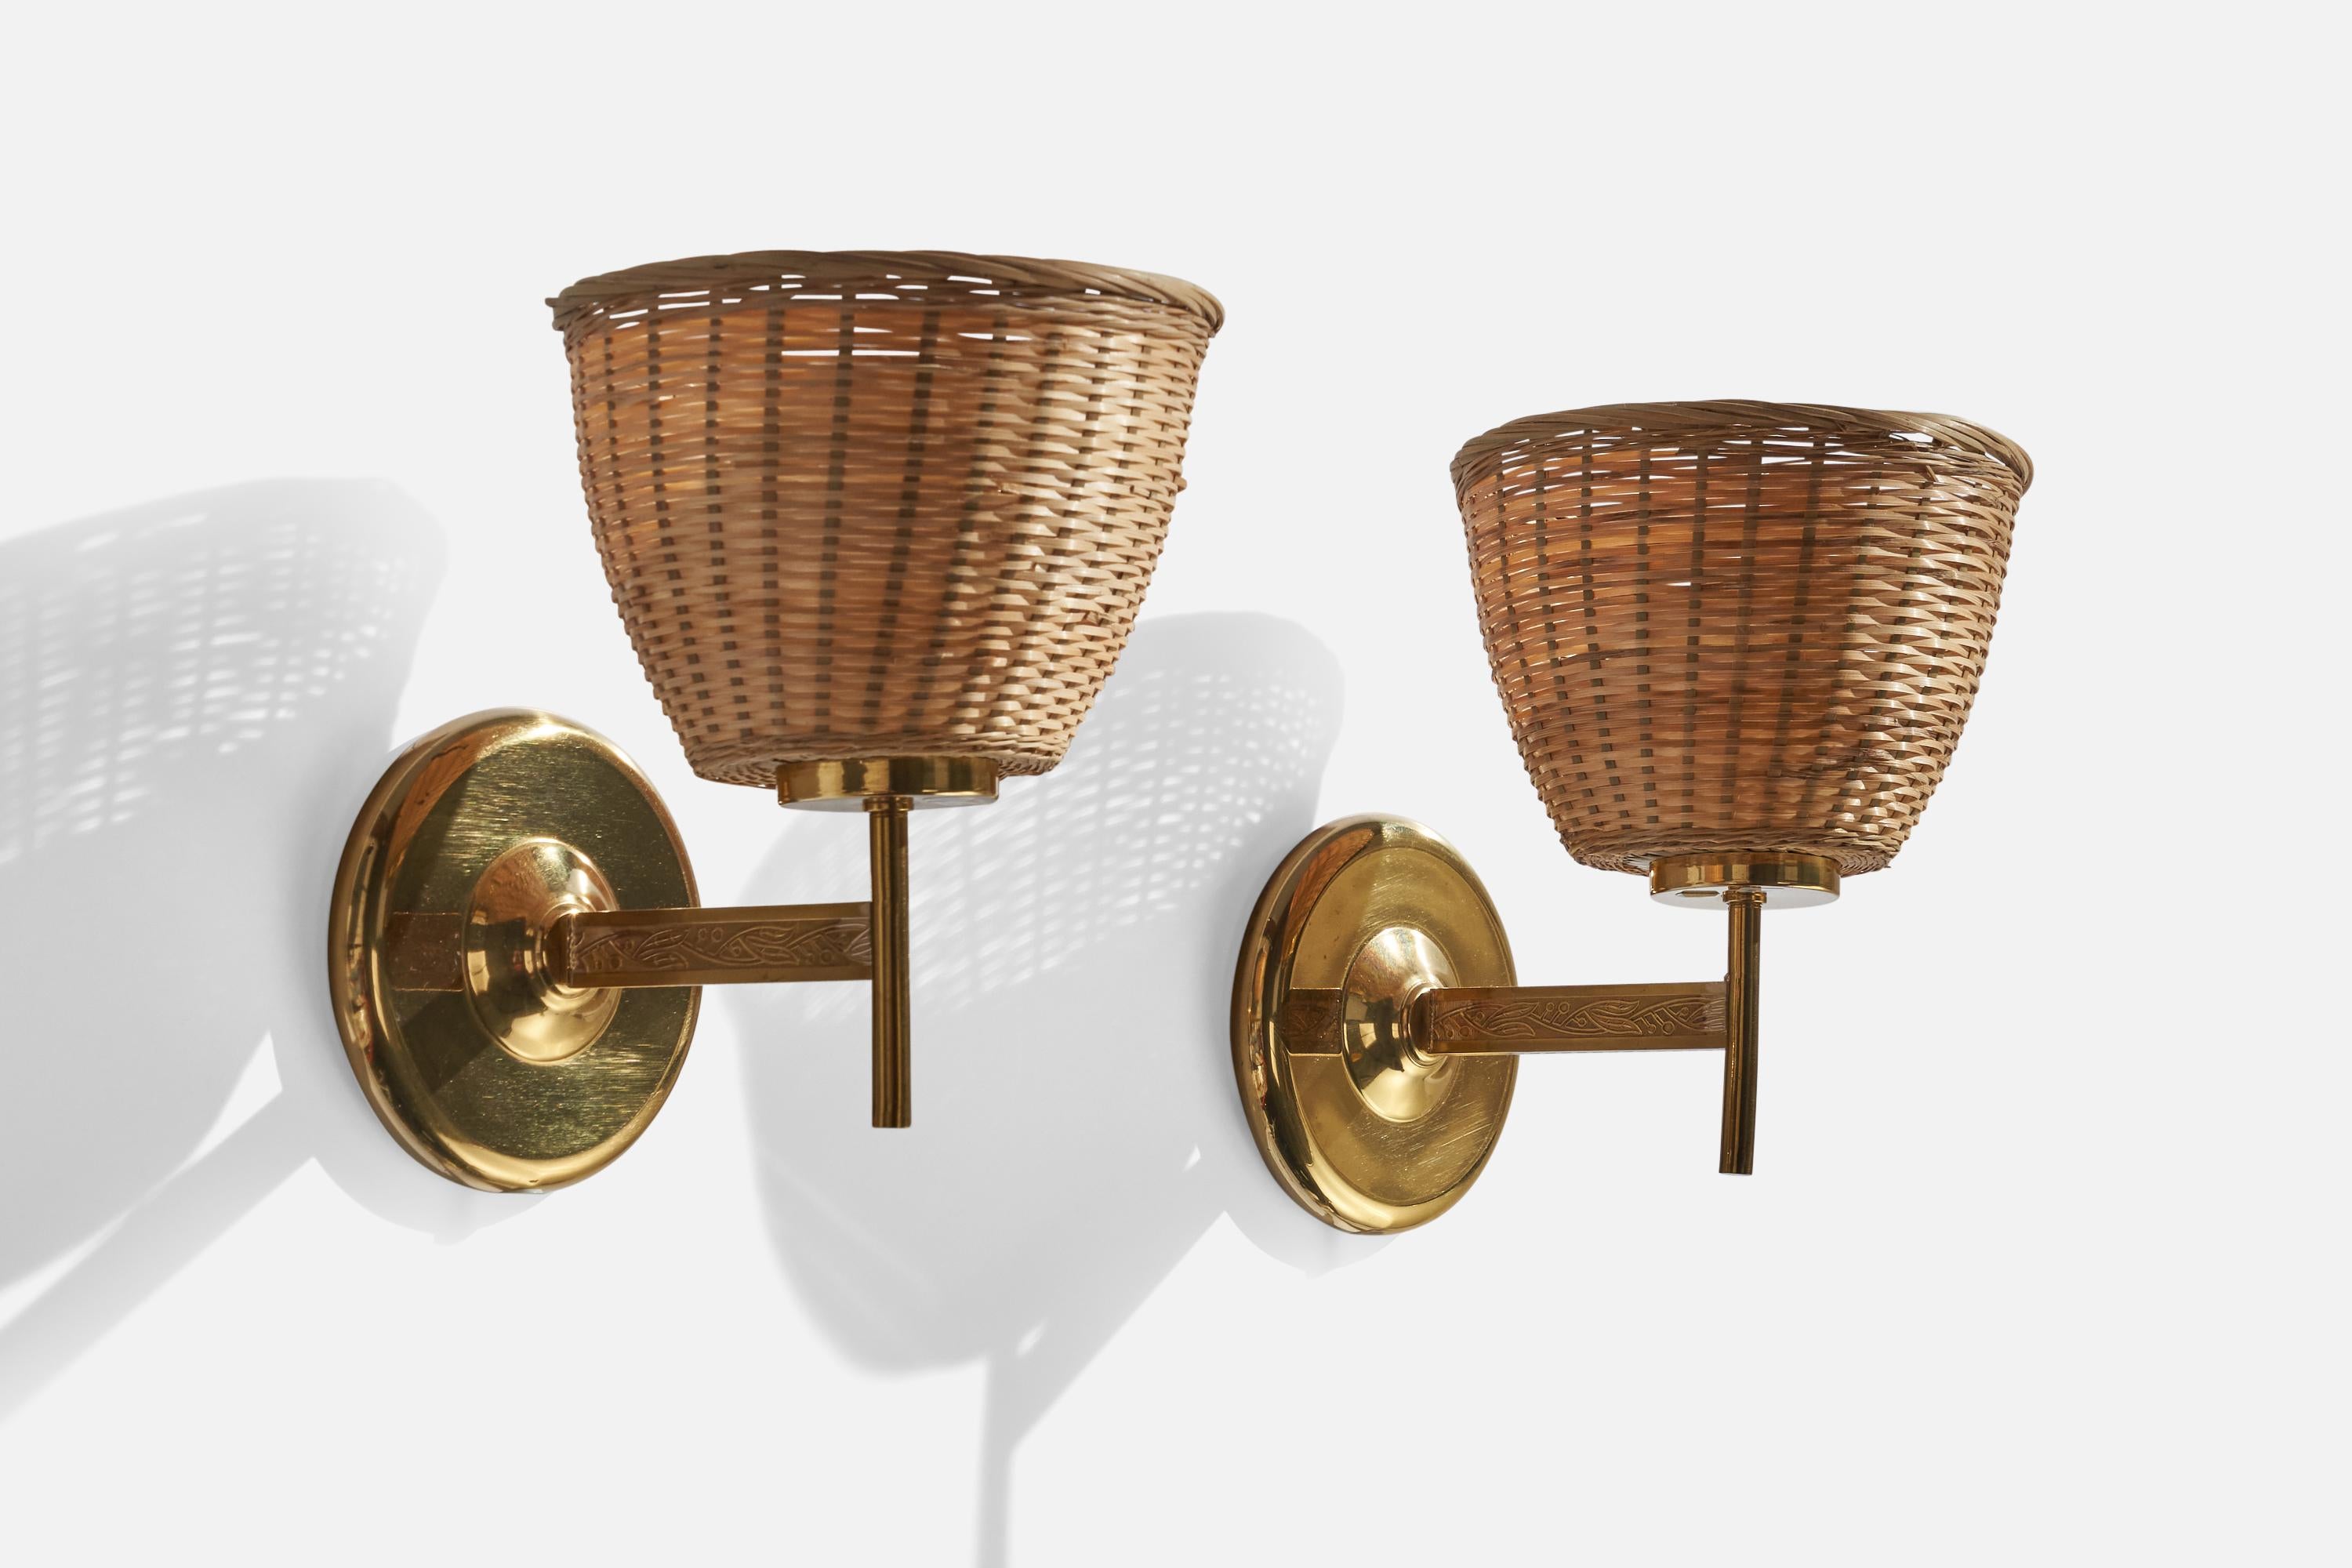 A pair of brass and rattan wall lights designed and produced in Sweden, c. 1960s.

Overall Dimensions (inches): 9”  H x 7” W x 8.5” D
Back Plate Dimensions (inches): 5”  H x 5”  W x .75 D
Bulb Specifications: E-26 Bulb
Number of Sockets: 2
All